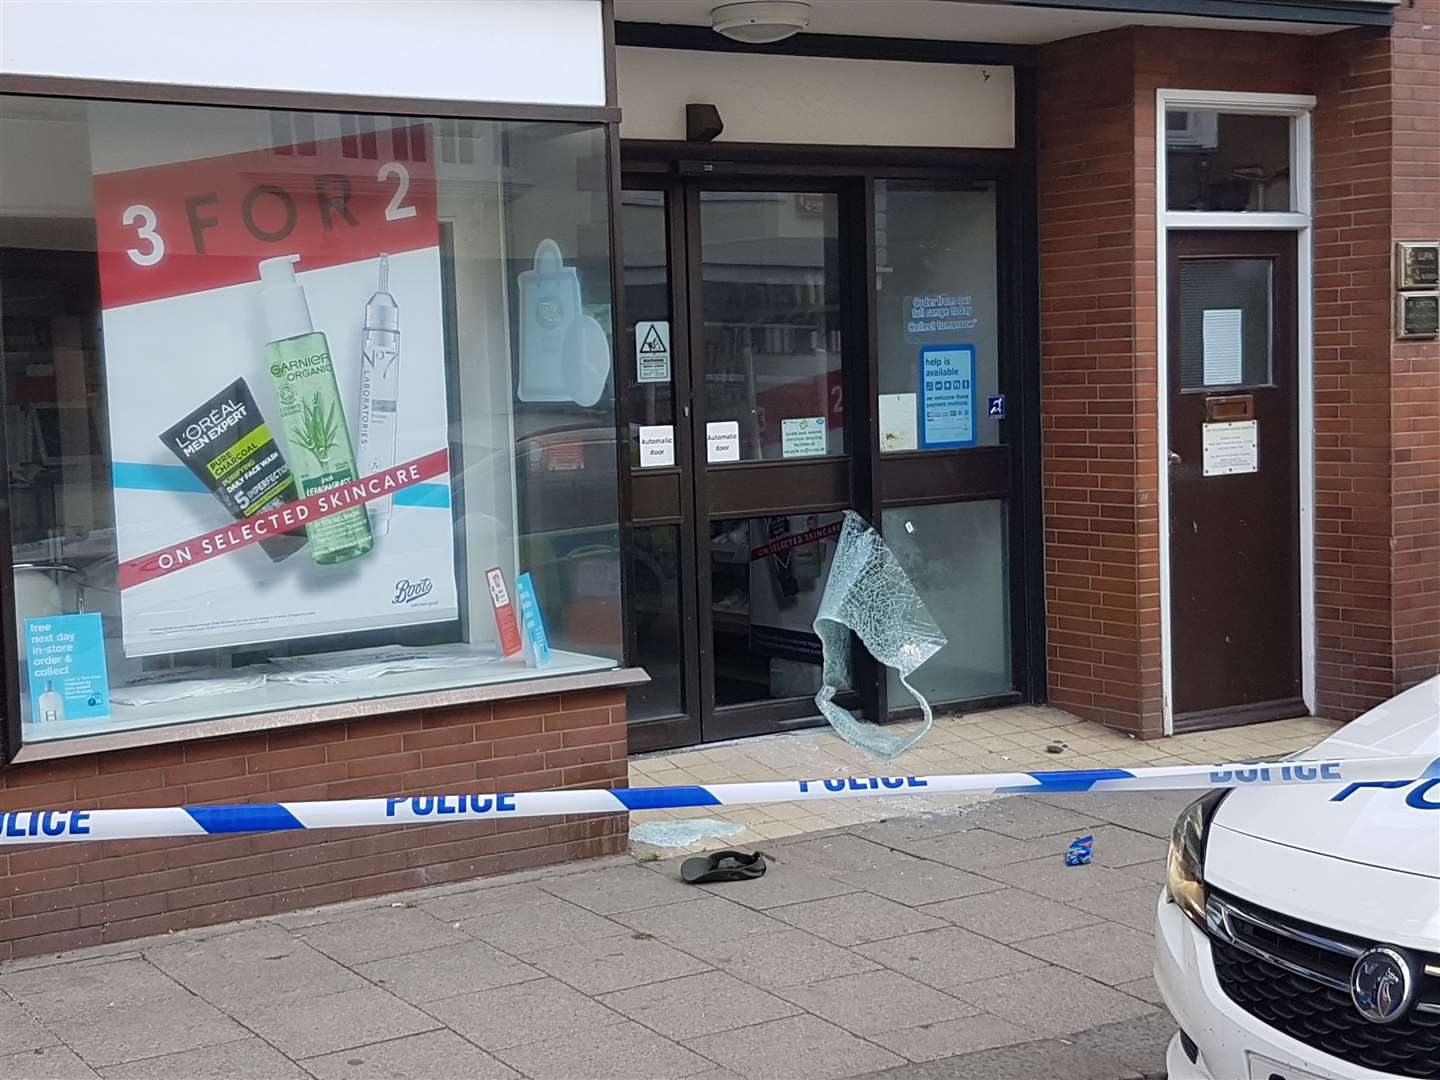 The door of the shop has been smashed (10956690)